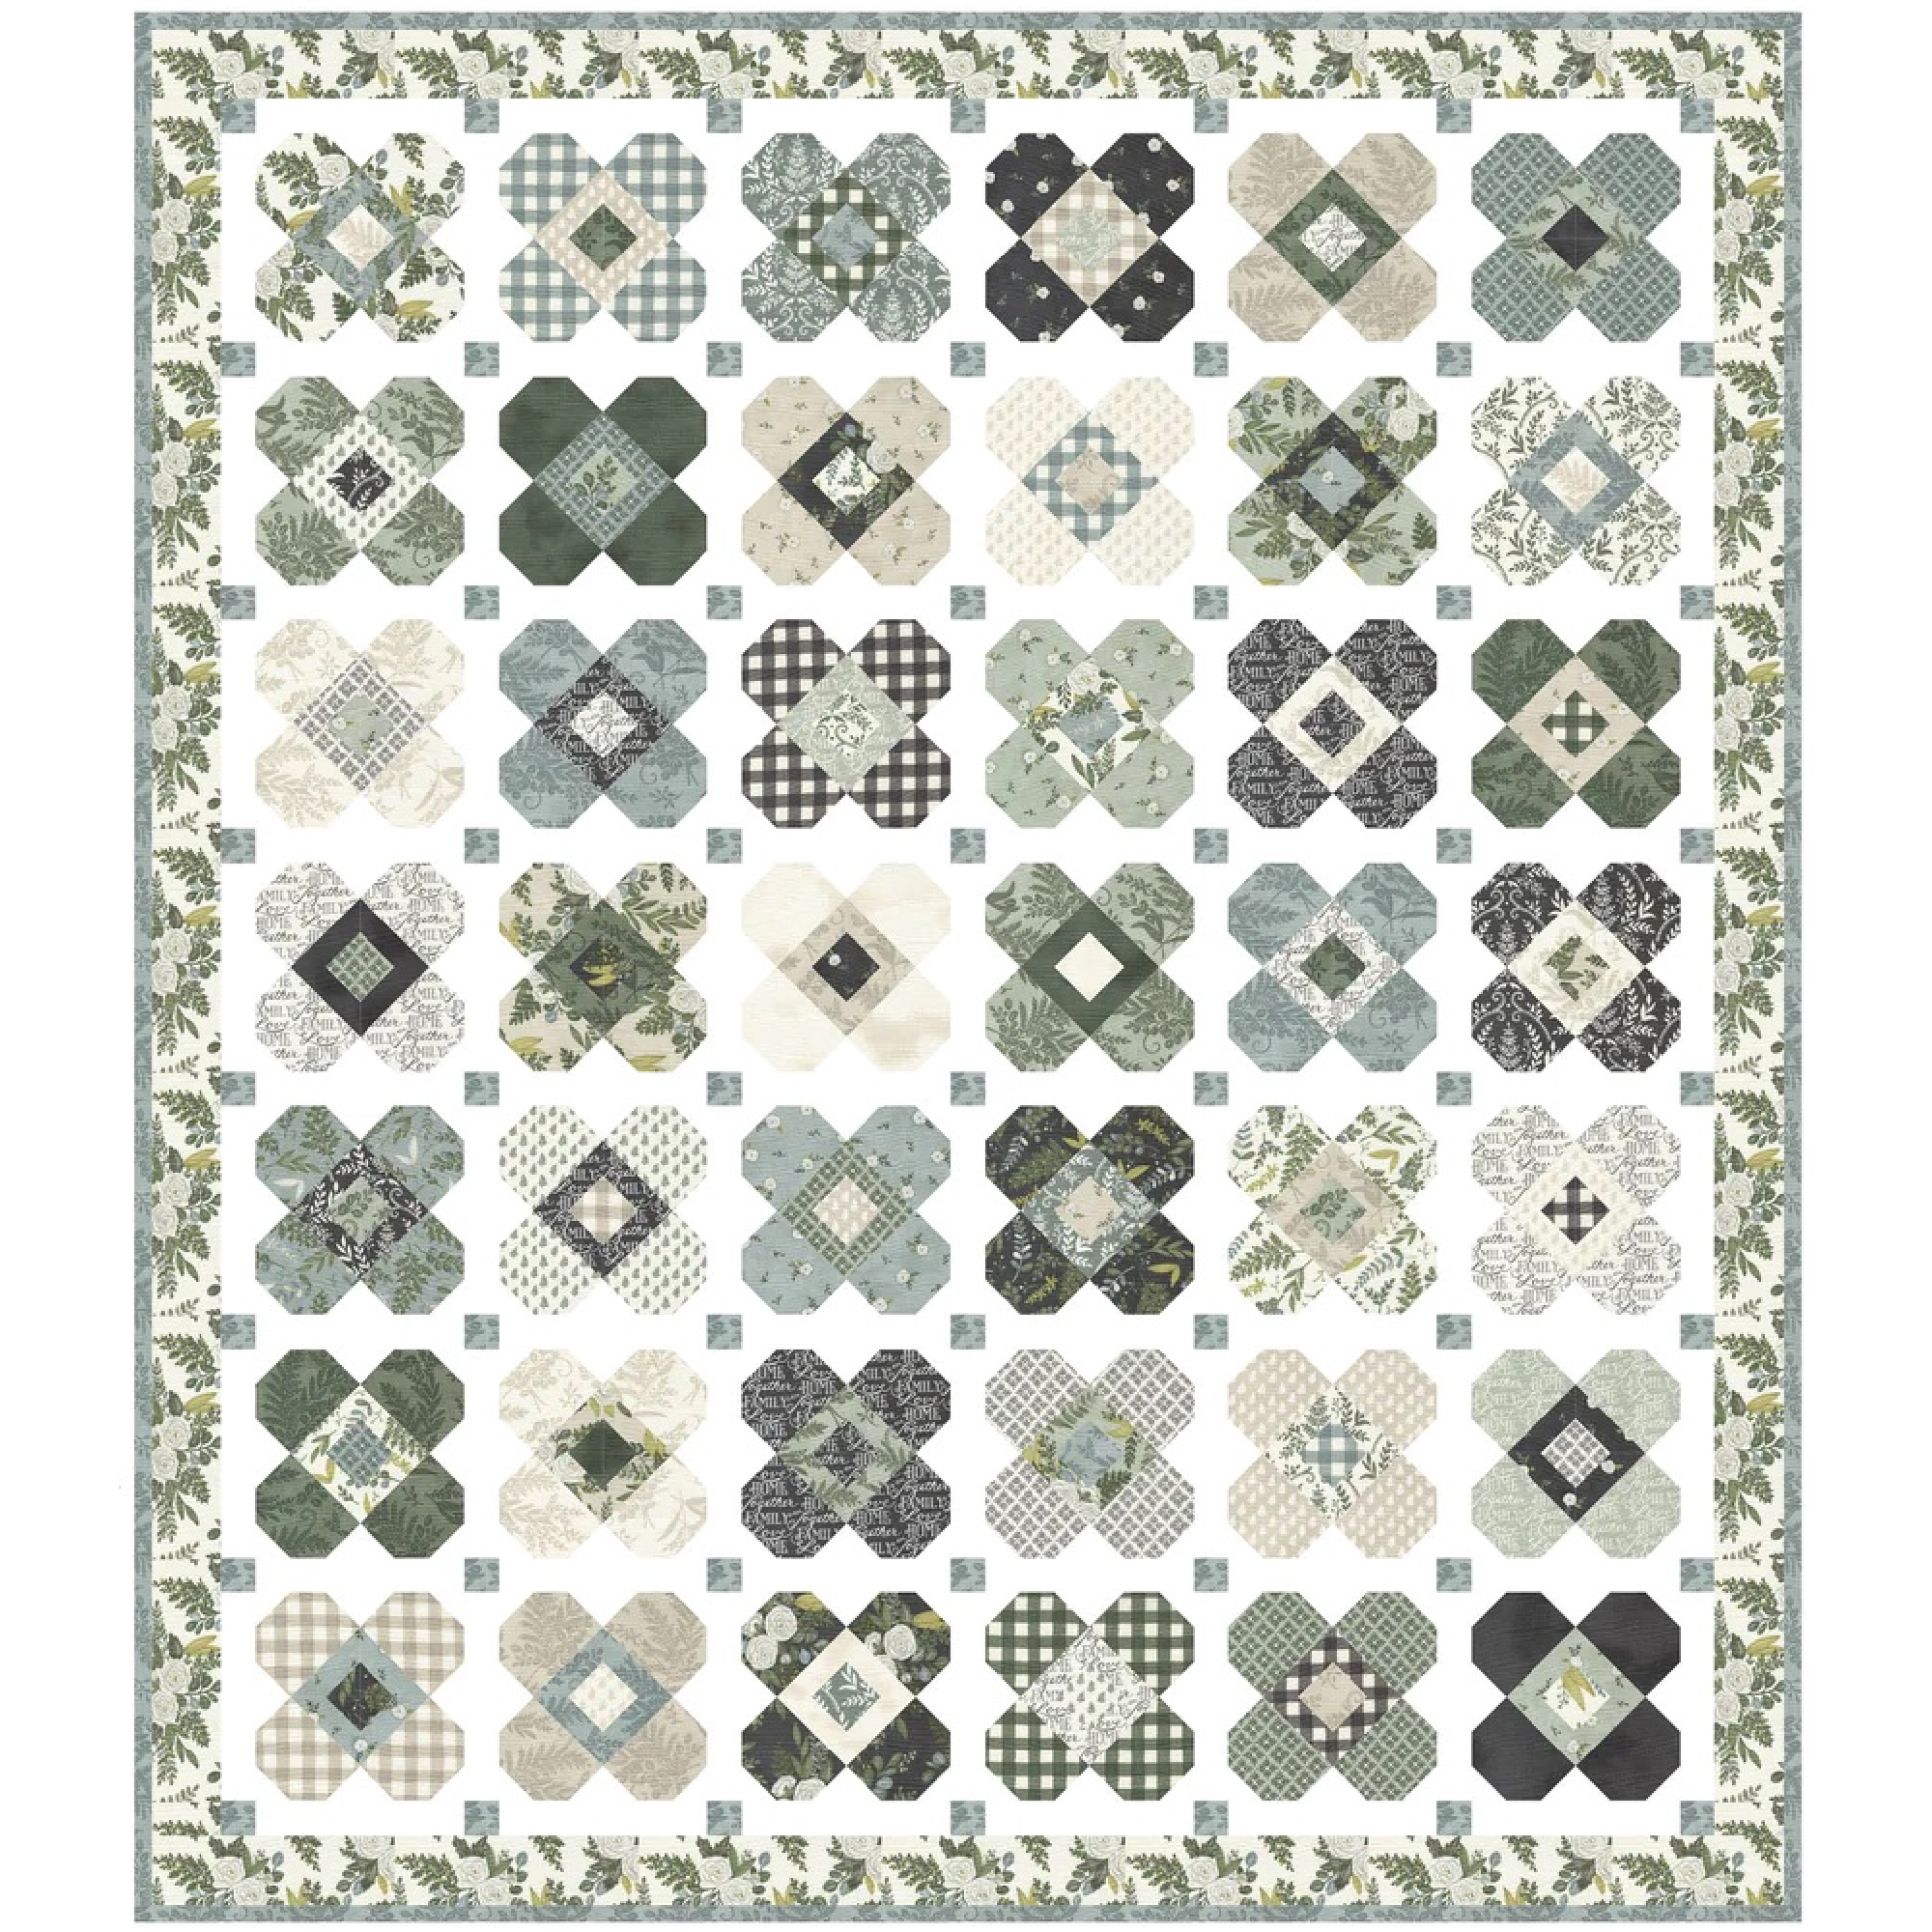 A LAYER OF BLOOMS QUILT KIT